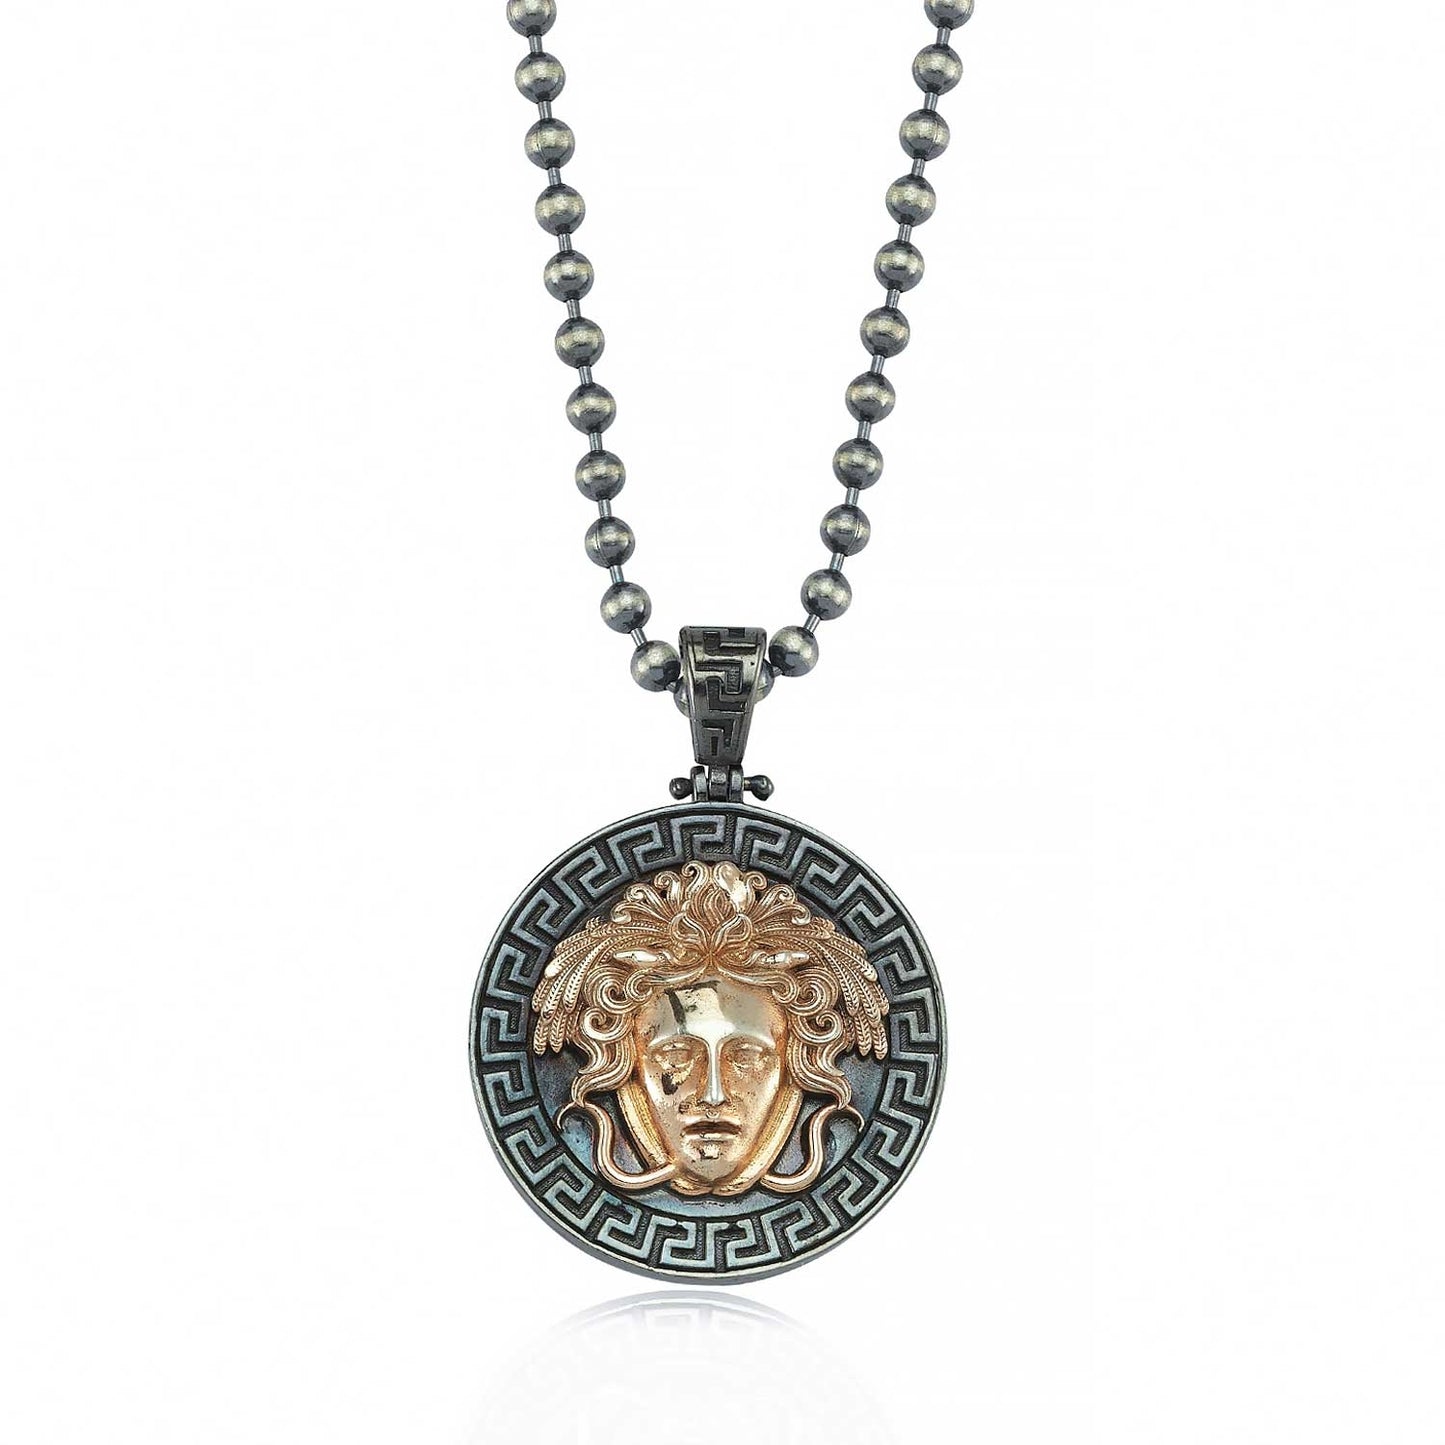 RARE PRINCE by CARAT SUTRA | Unique Designed Medusa/ Versace Pendant | 925 Sterling Silver Rosegold Plated Oxidized Pendant | Men's Jewelry | With Certificate of Authenticity and 925 Hallmark - caratsutra